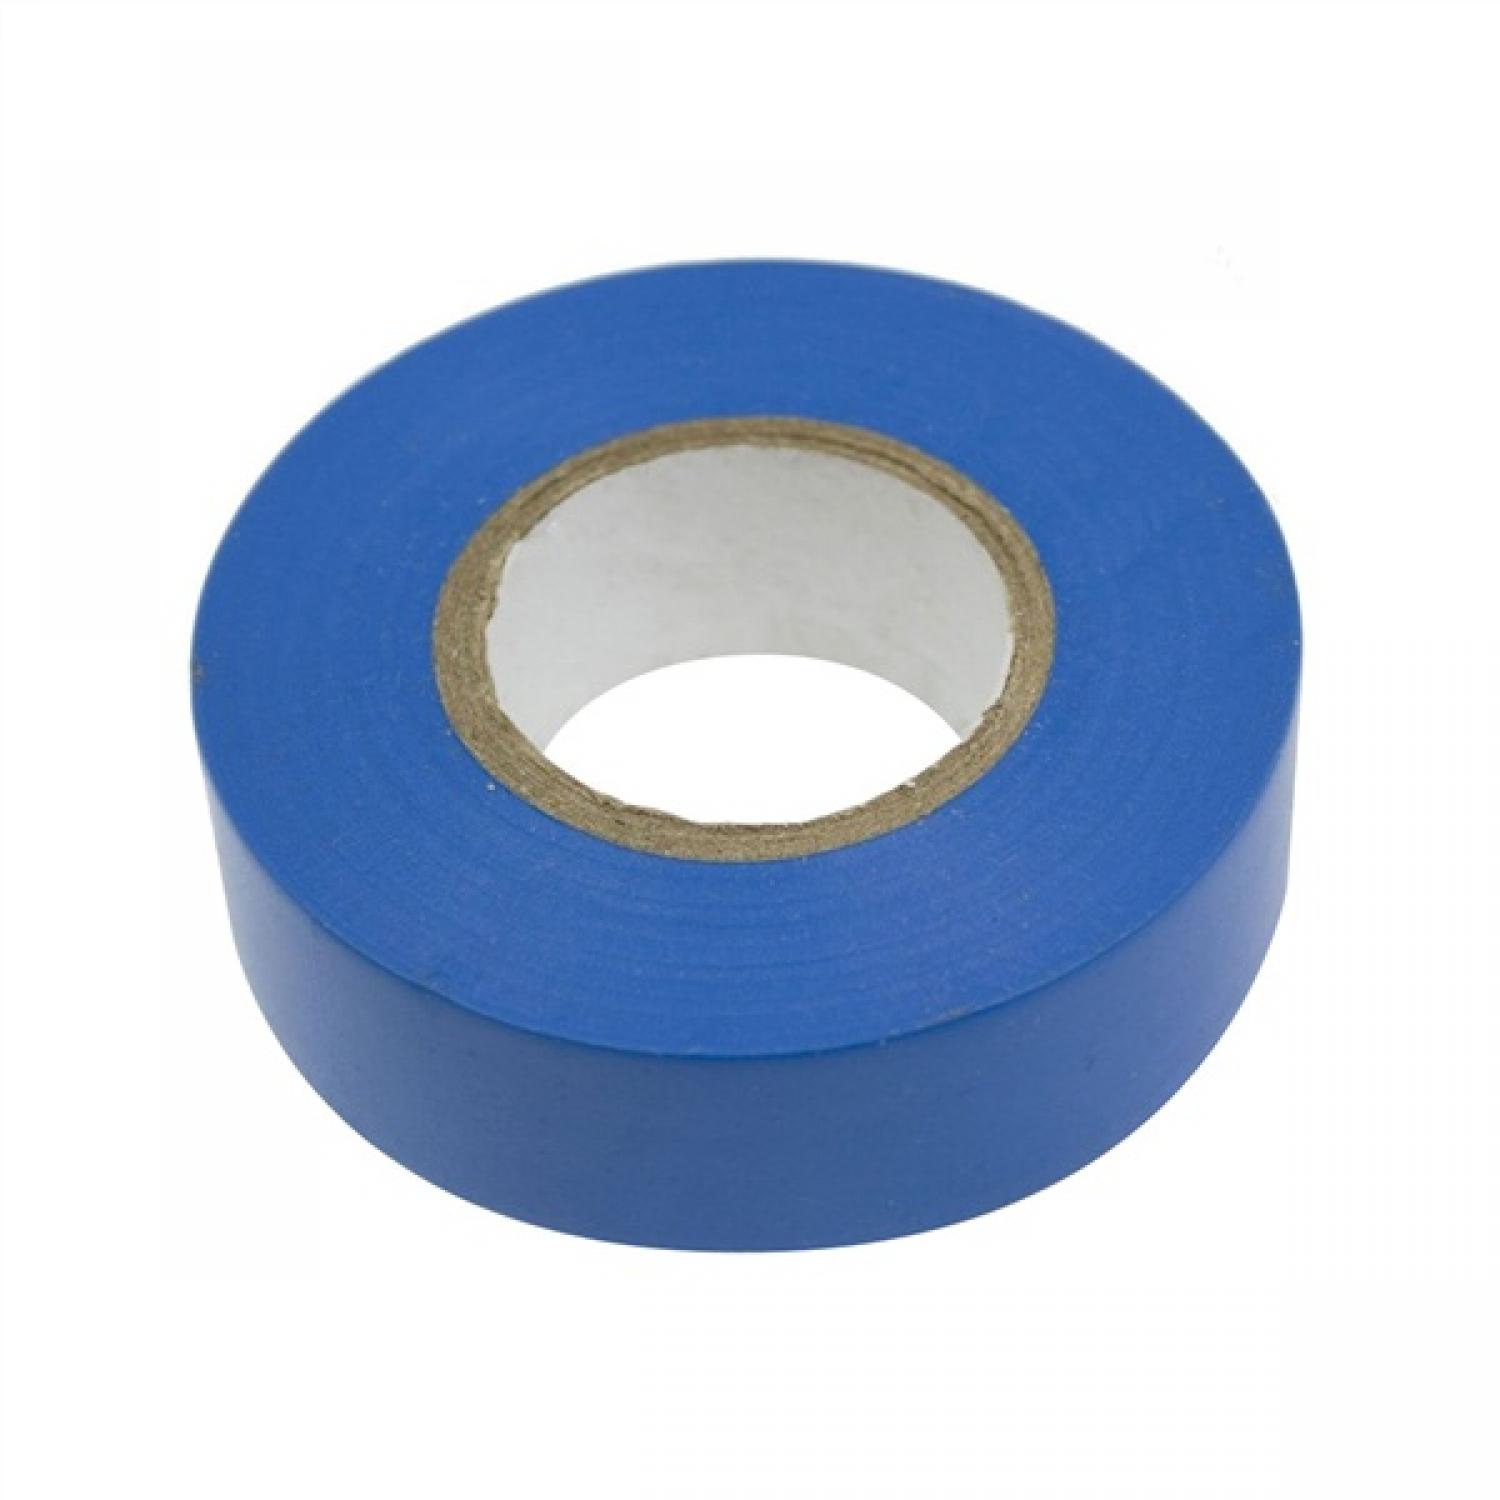 Buy PVC Insulating Tape Blue from Fane Valley Stores Agricultural Supplies